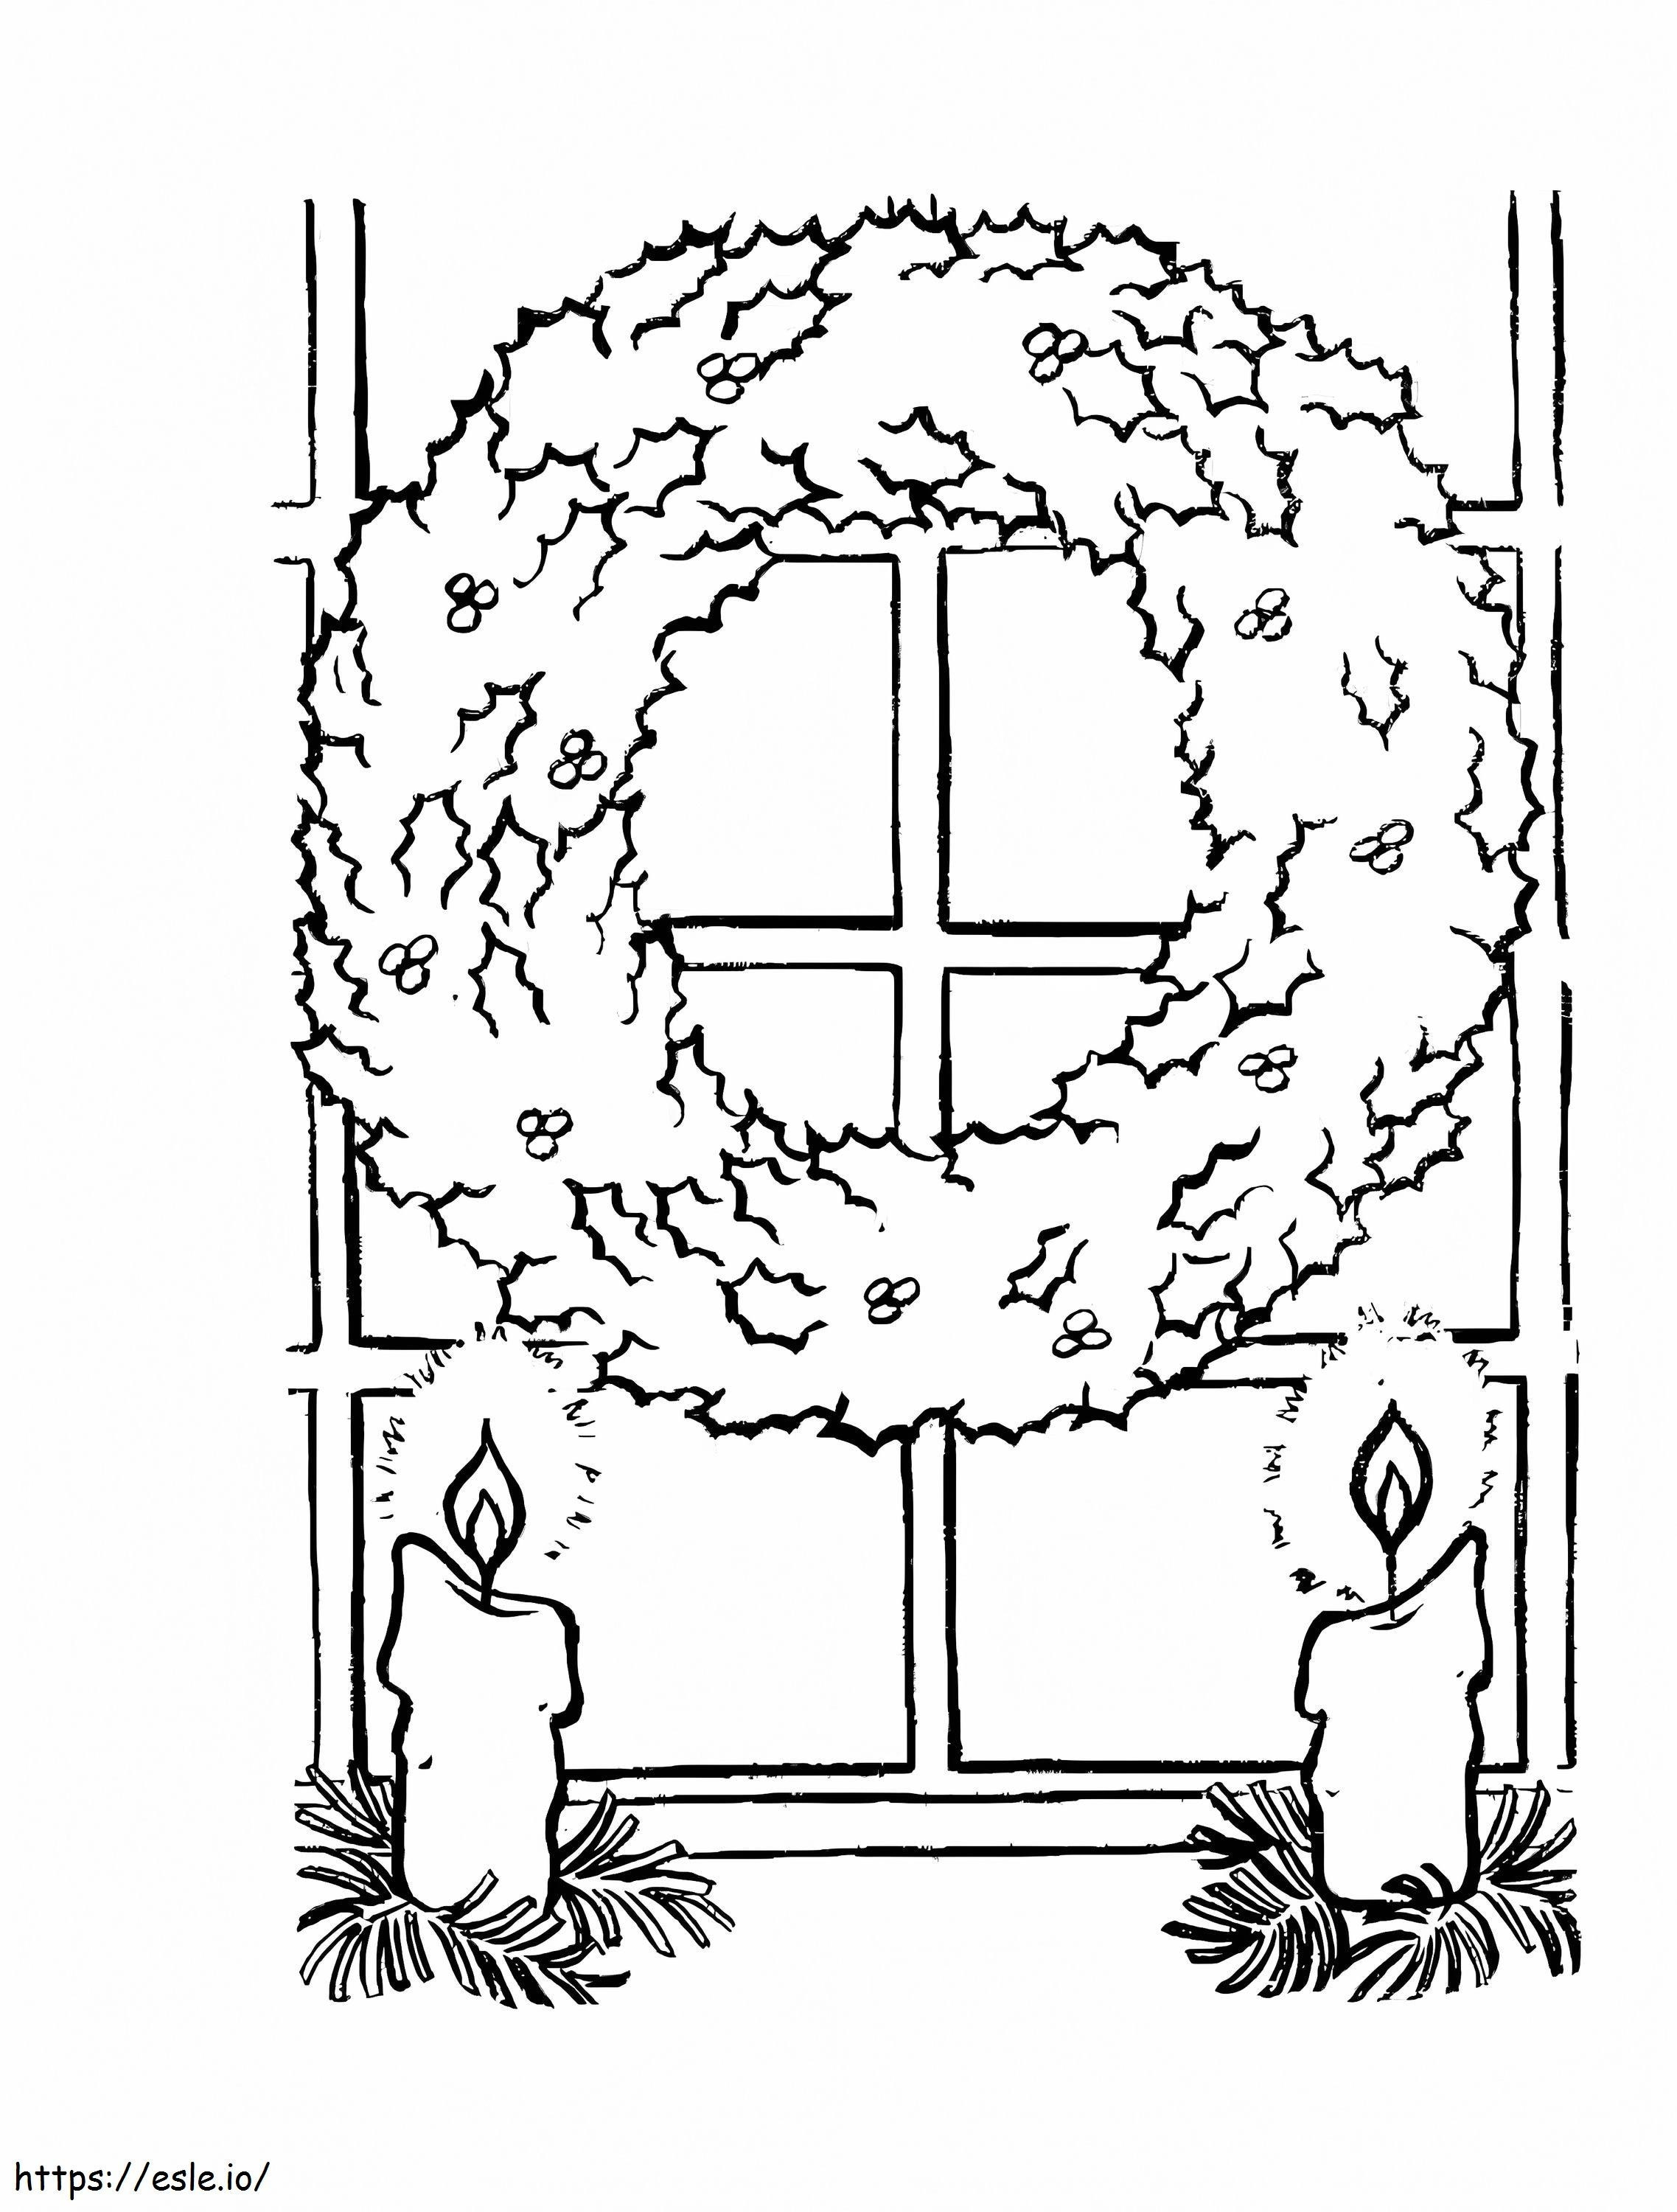 Christmas Wreath With Candles coloring page